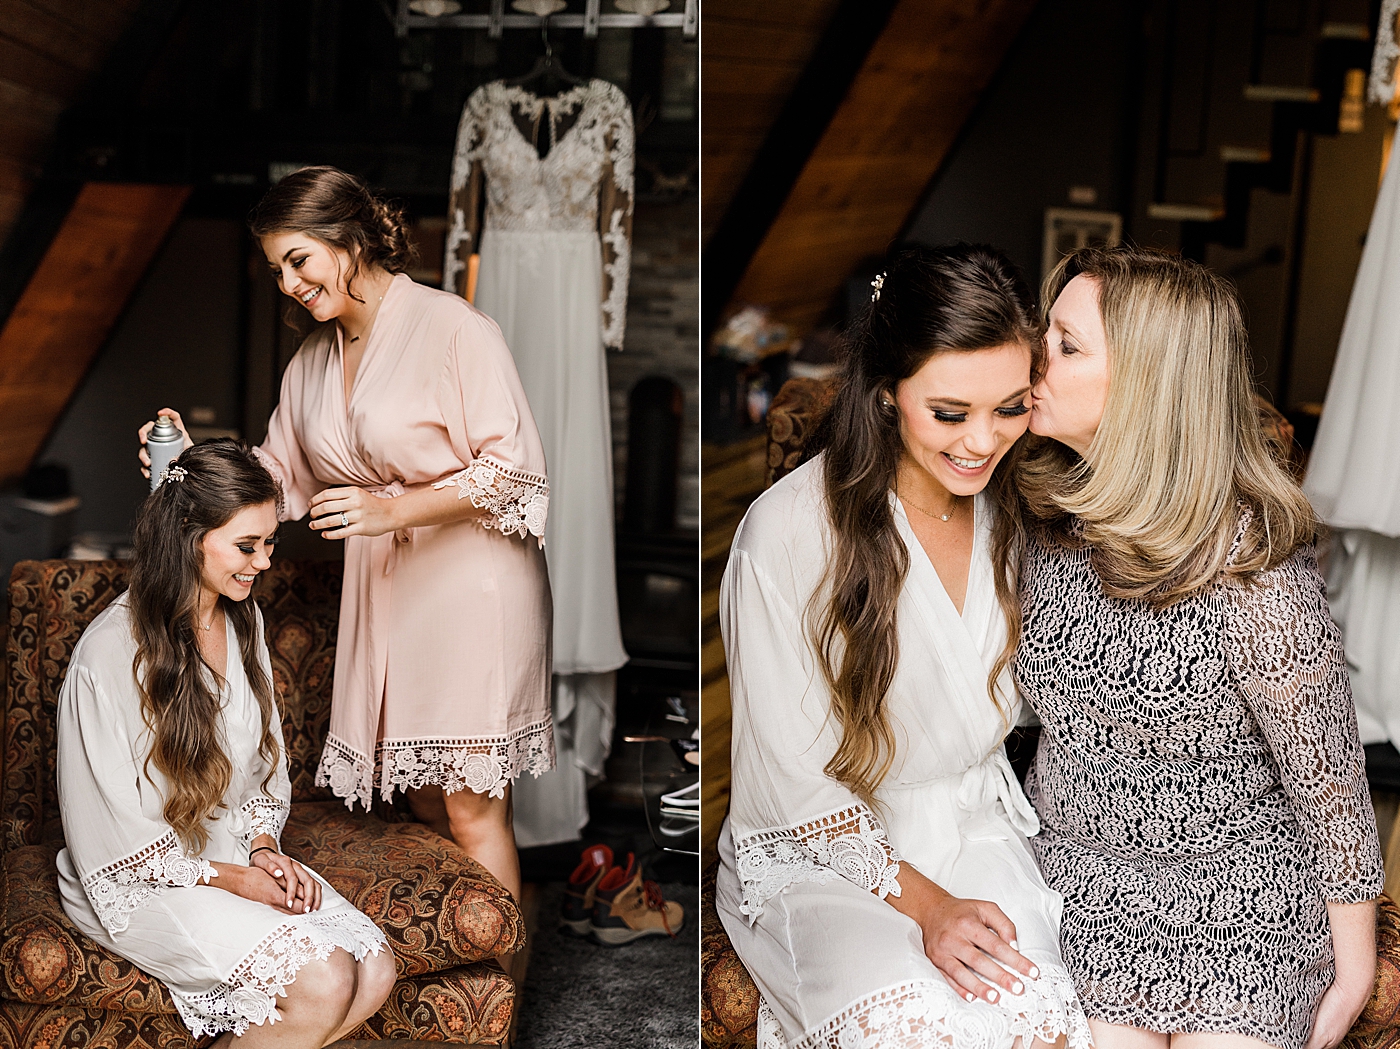 Bride getting ready for elopement at a cabin in Ashford, WA | Megan Montalvo Photography